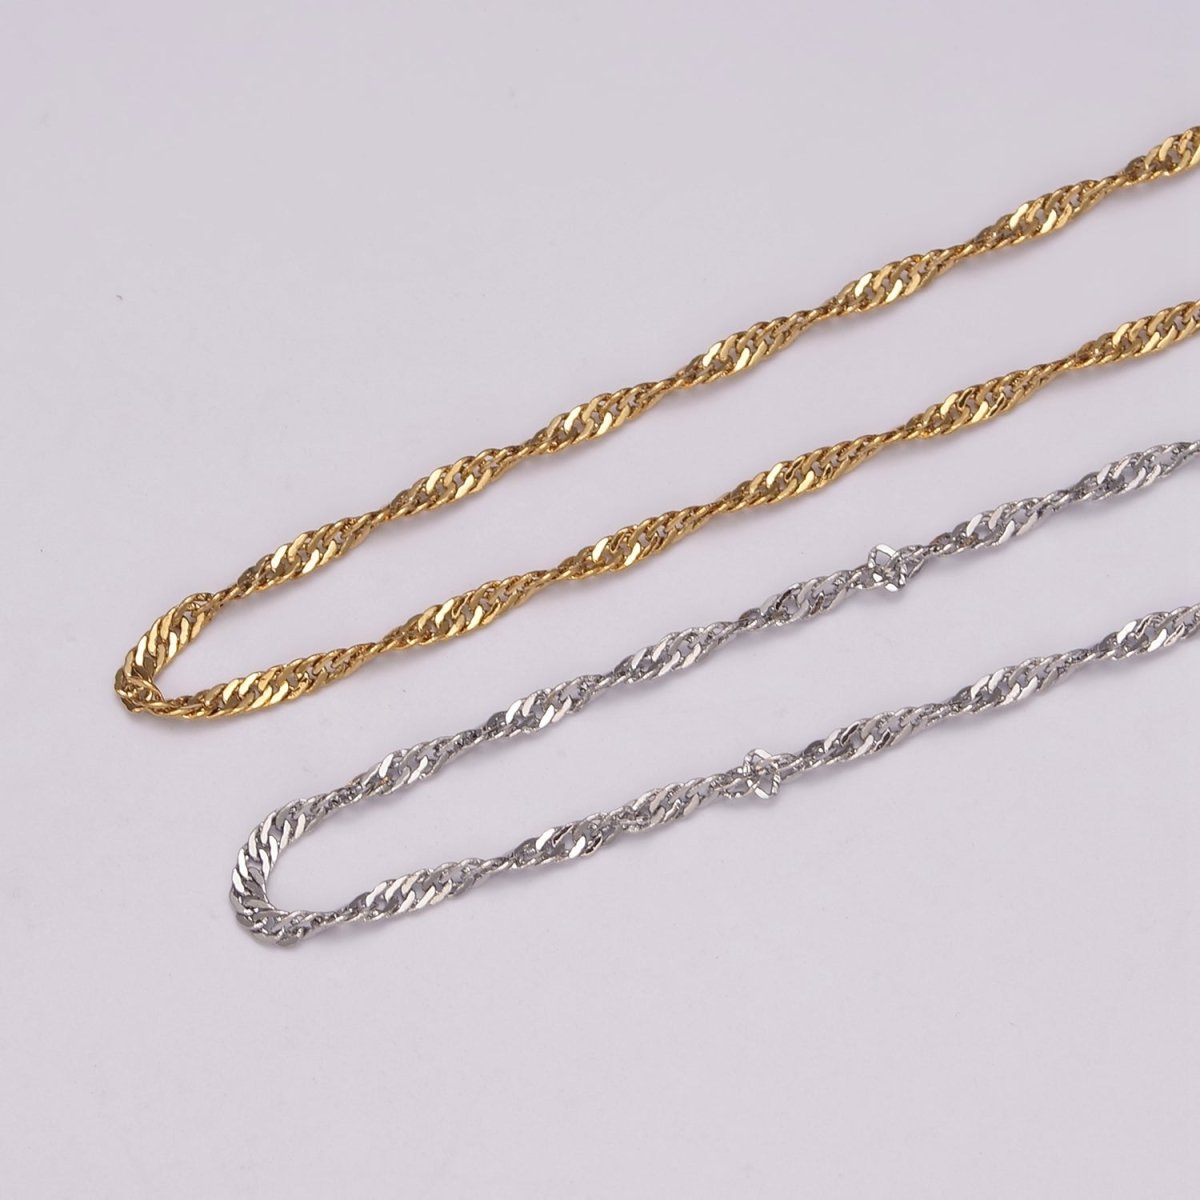 18K Gold Filled Singapore Chain Necklace, 1.5mm In Width, Ready To Wear Silver Twist Chain Necklace 18 inch | WA-442 WA-443 WA-727 Clearance Pricing - DLUXCA